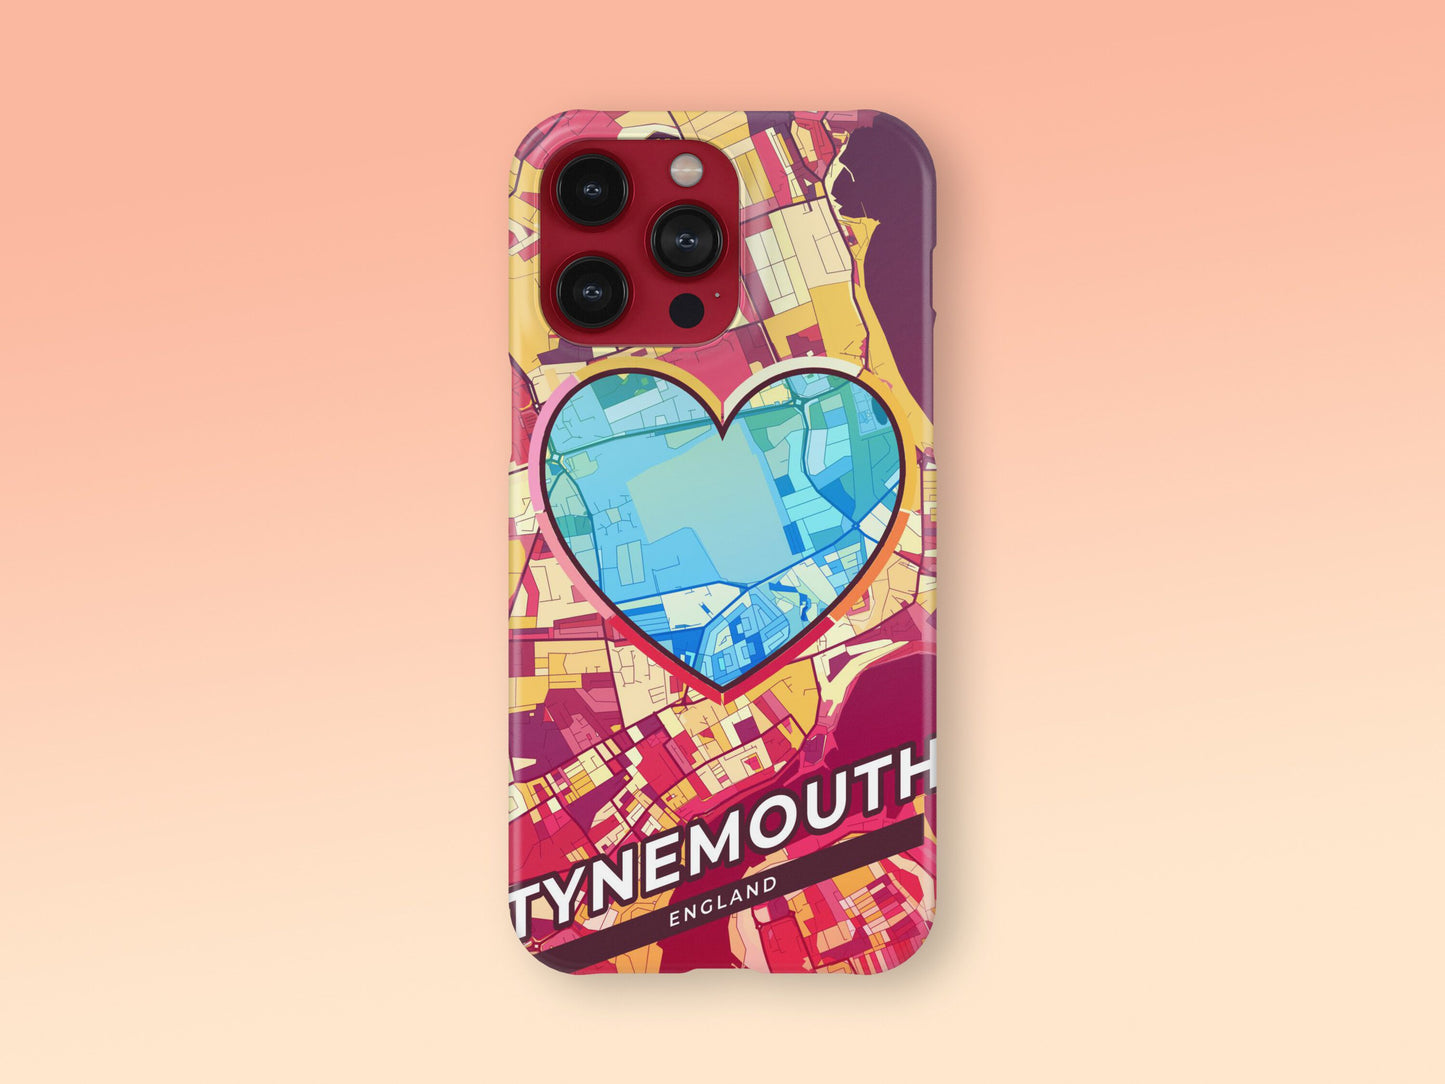 Tynemouth England slim phone case with colorful icon 2